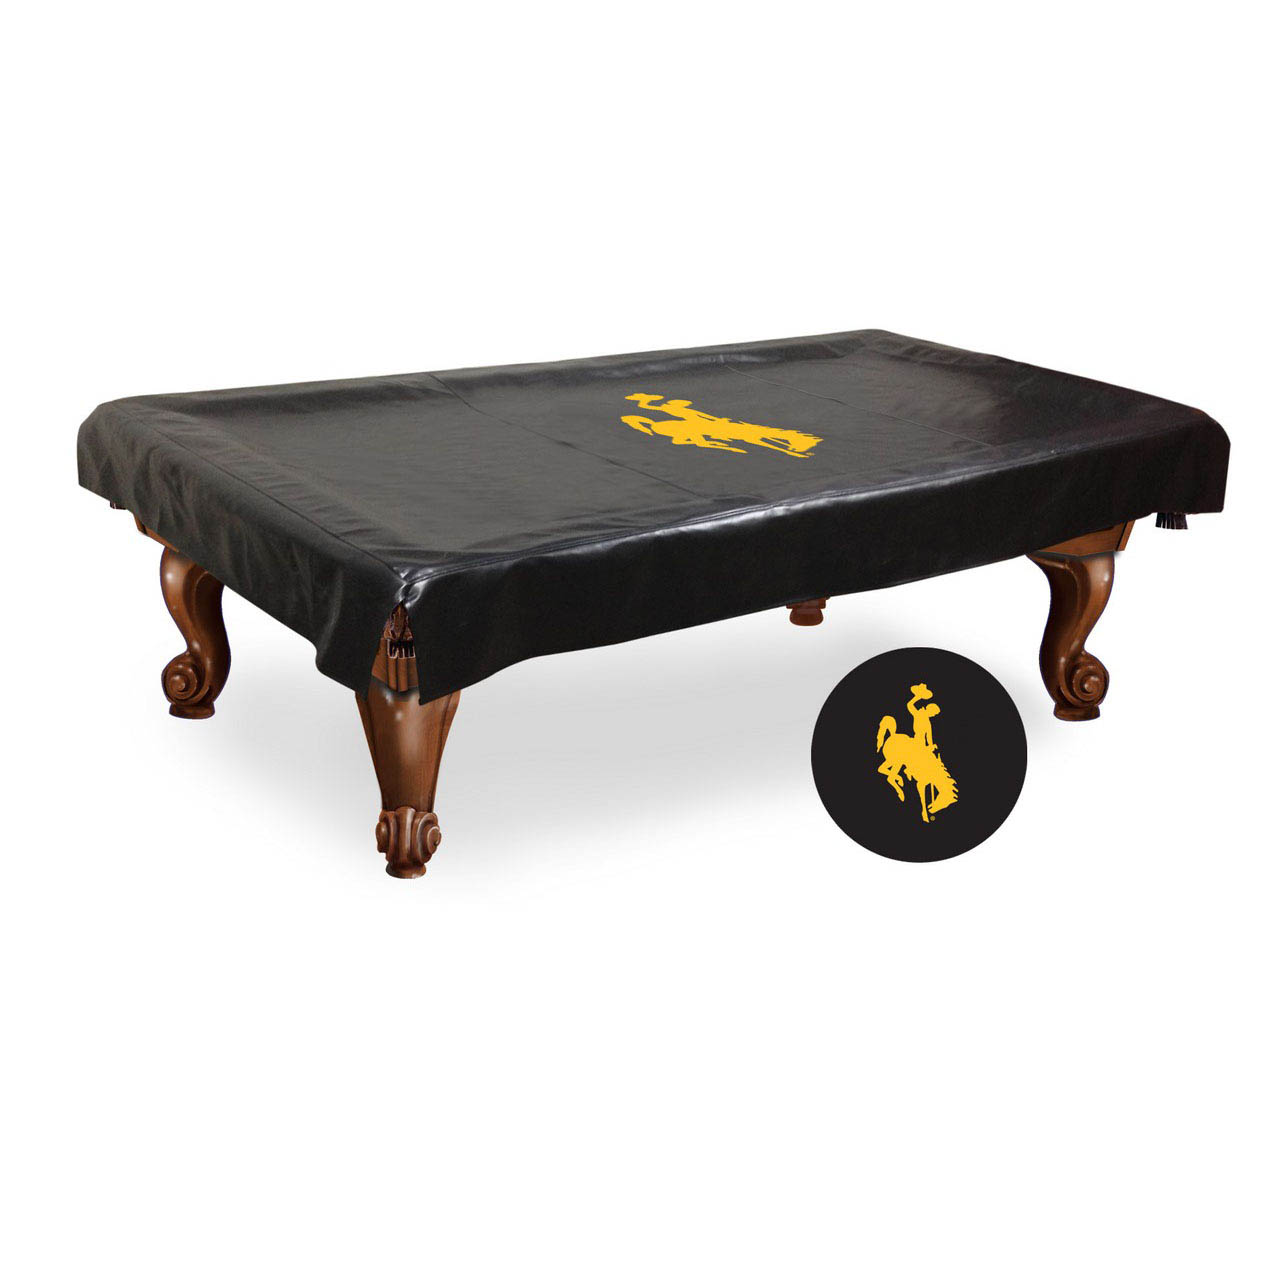 Wyoming Billiard Table Cover